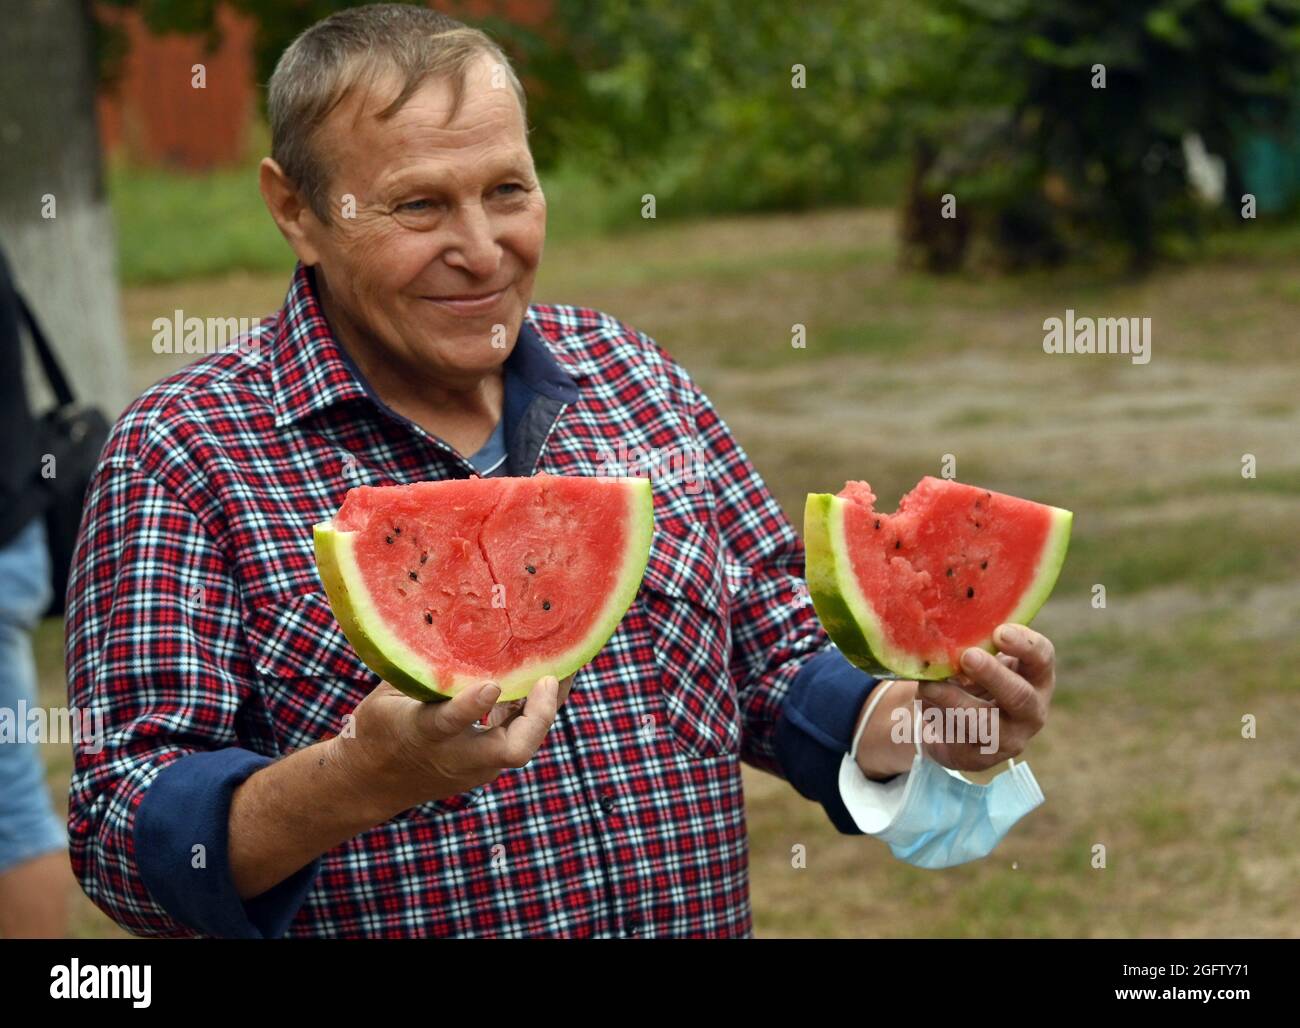 SIEVIERODONETSK, UKRAINE - AUGUST 24, 2021 - A man in a checked shirt holds two slices of a watermelon during the Bashtan Fest, a watermelon festival Stock Photo